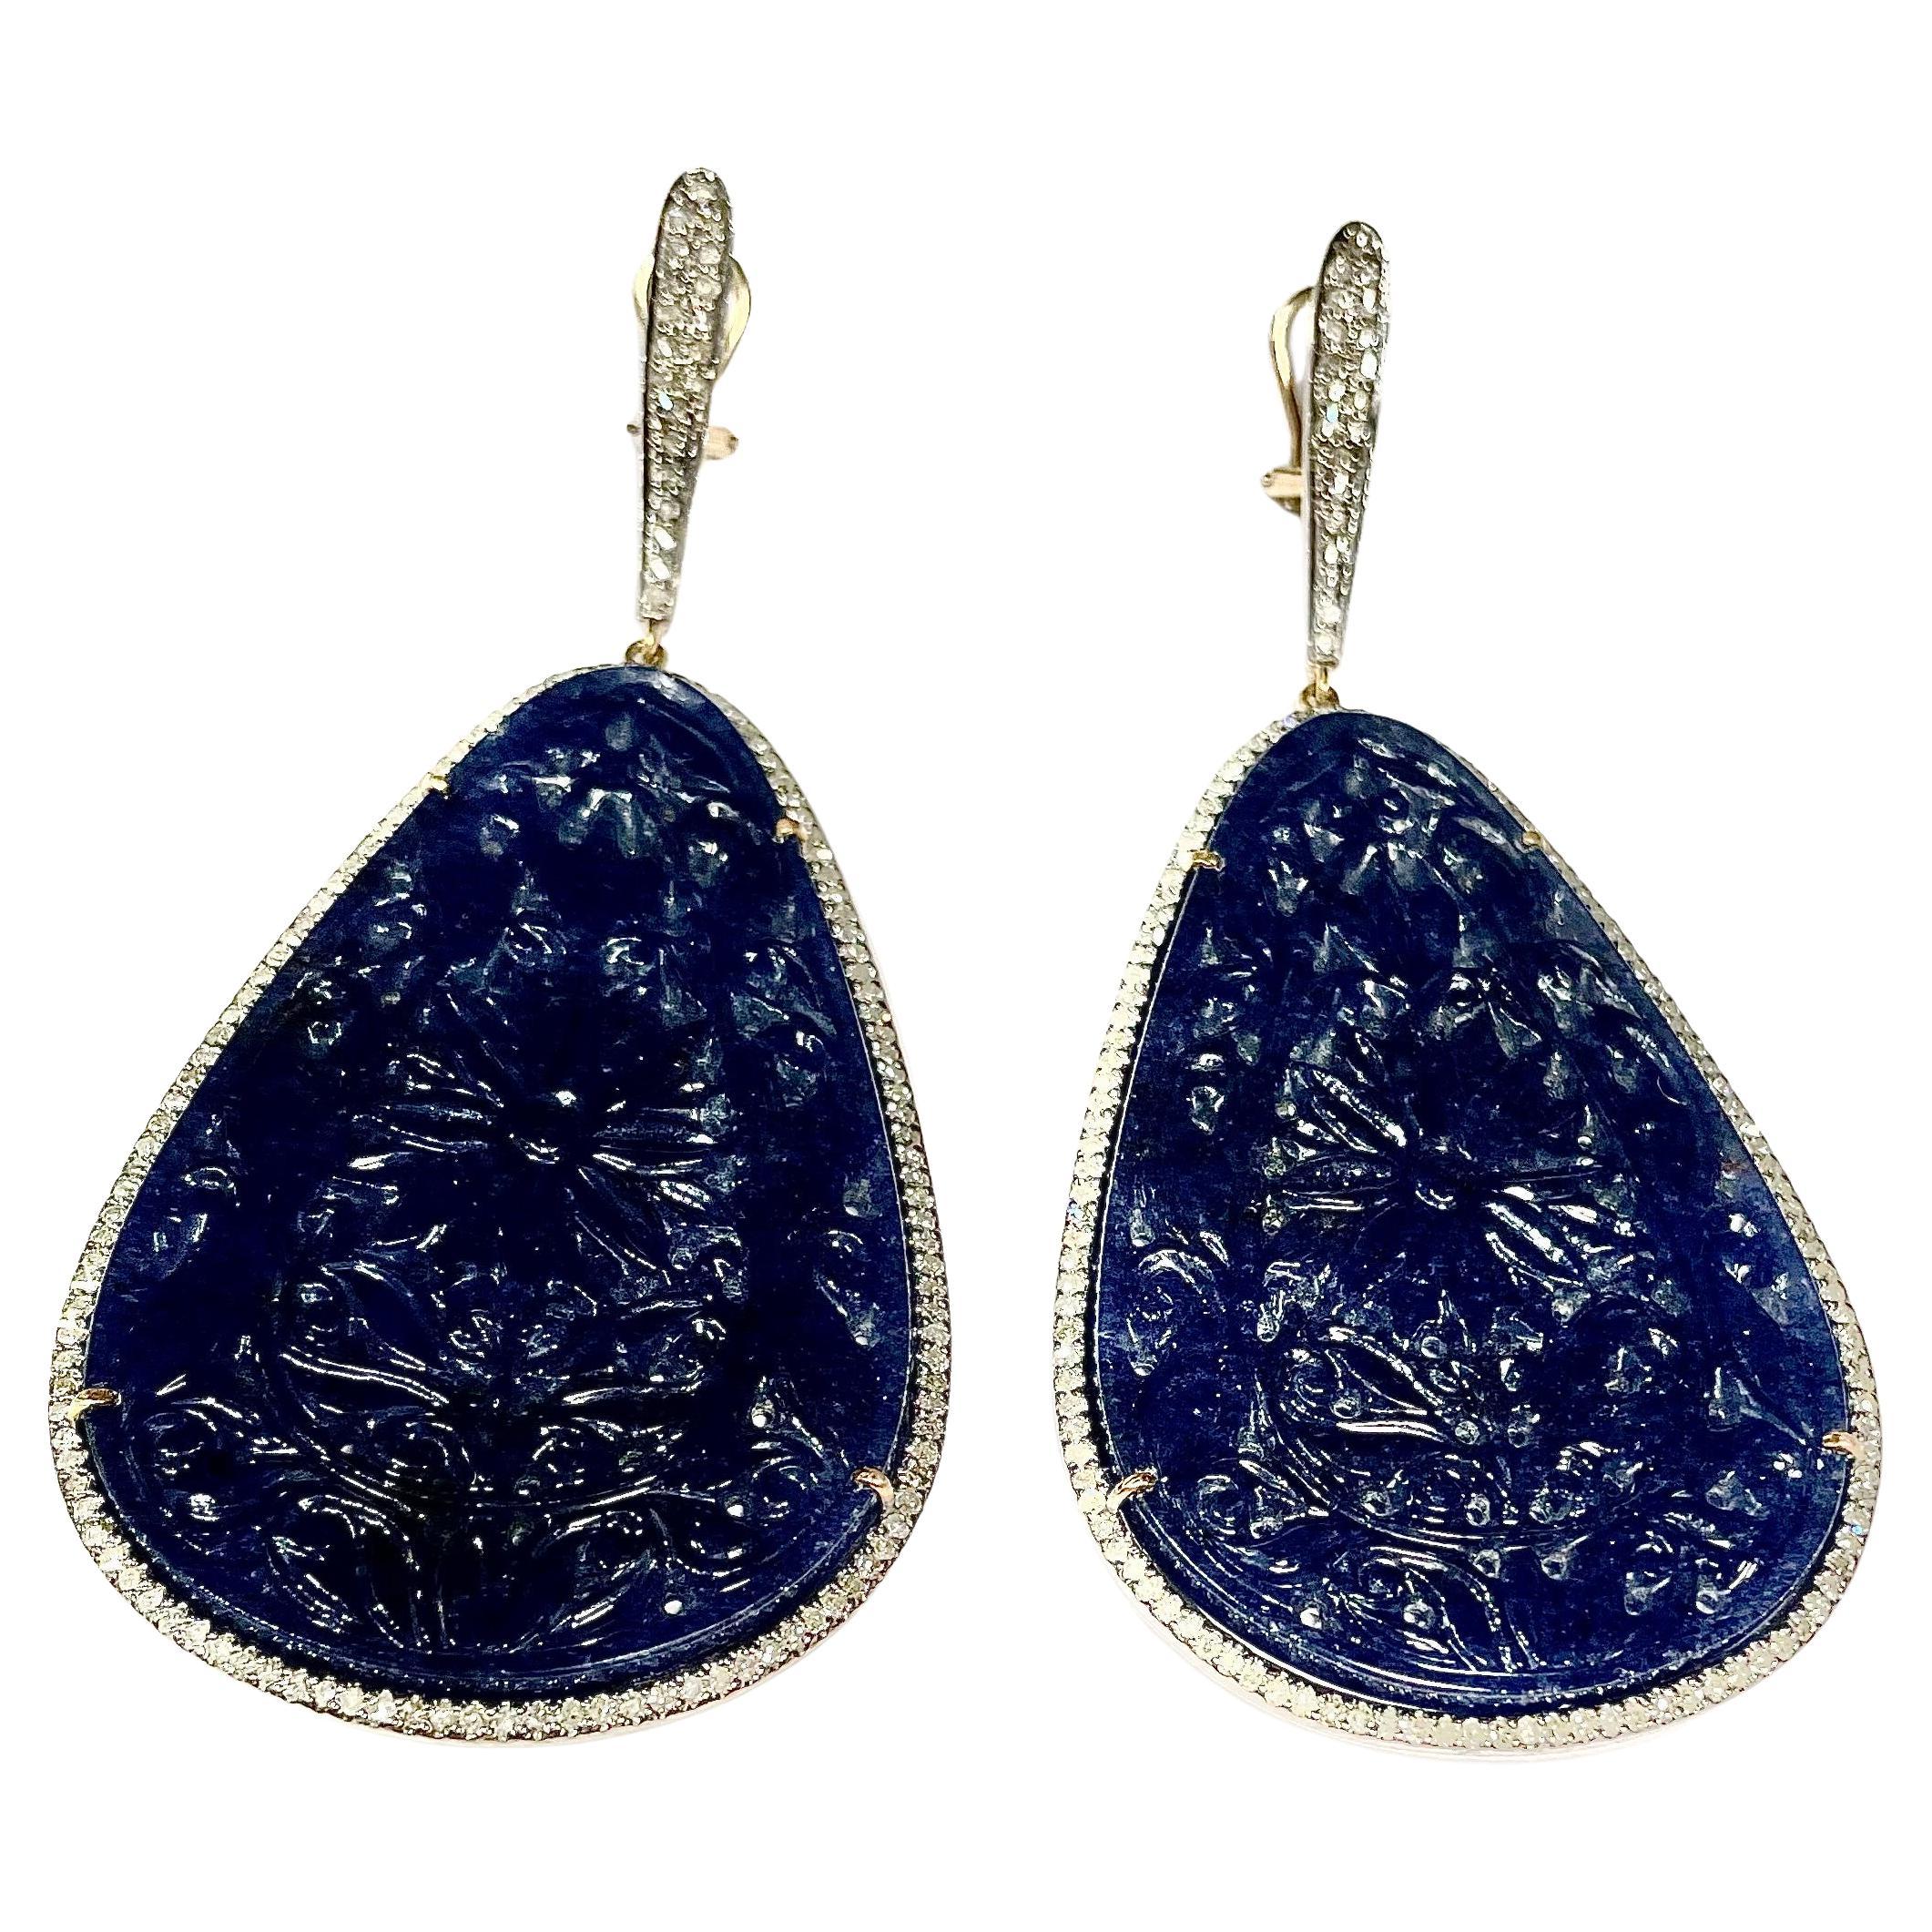 Carved Midnight Blue Onyx 105 Carats with Pave Diamonds Earrings